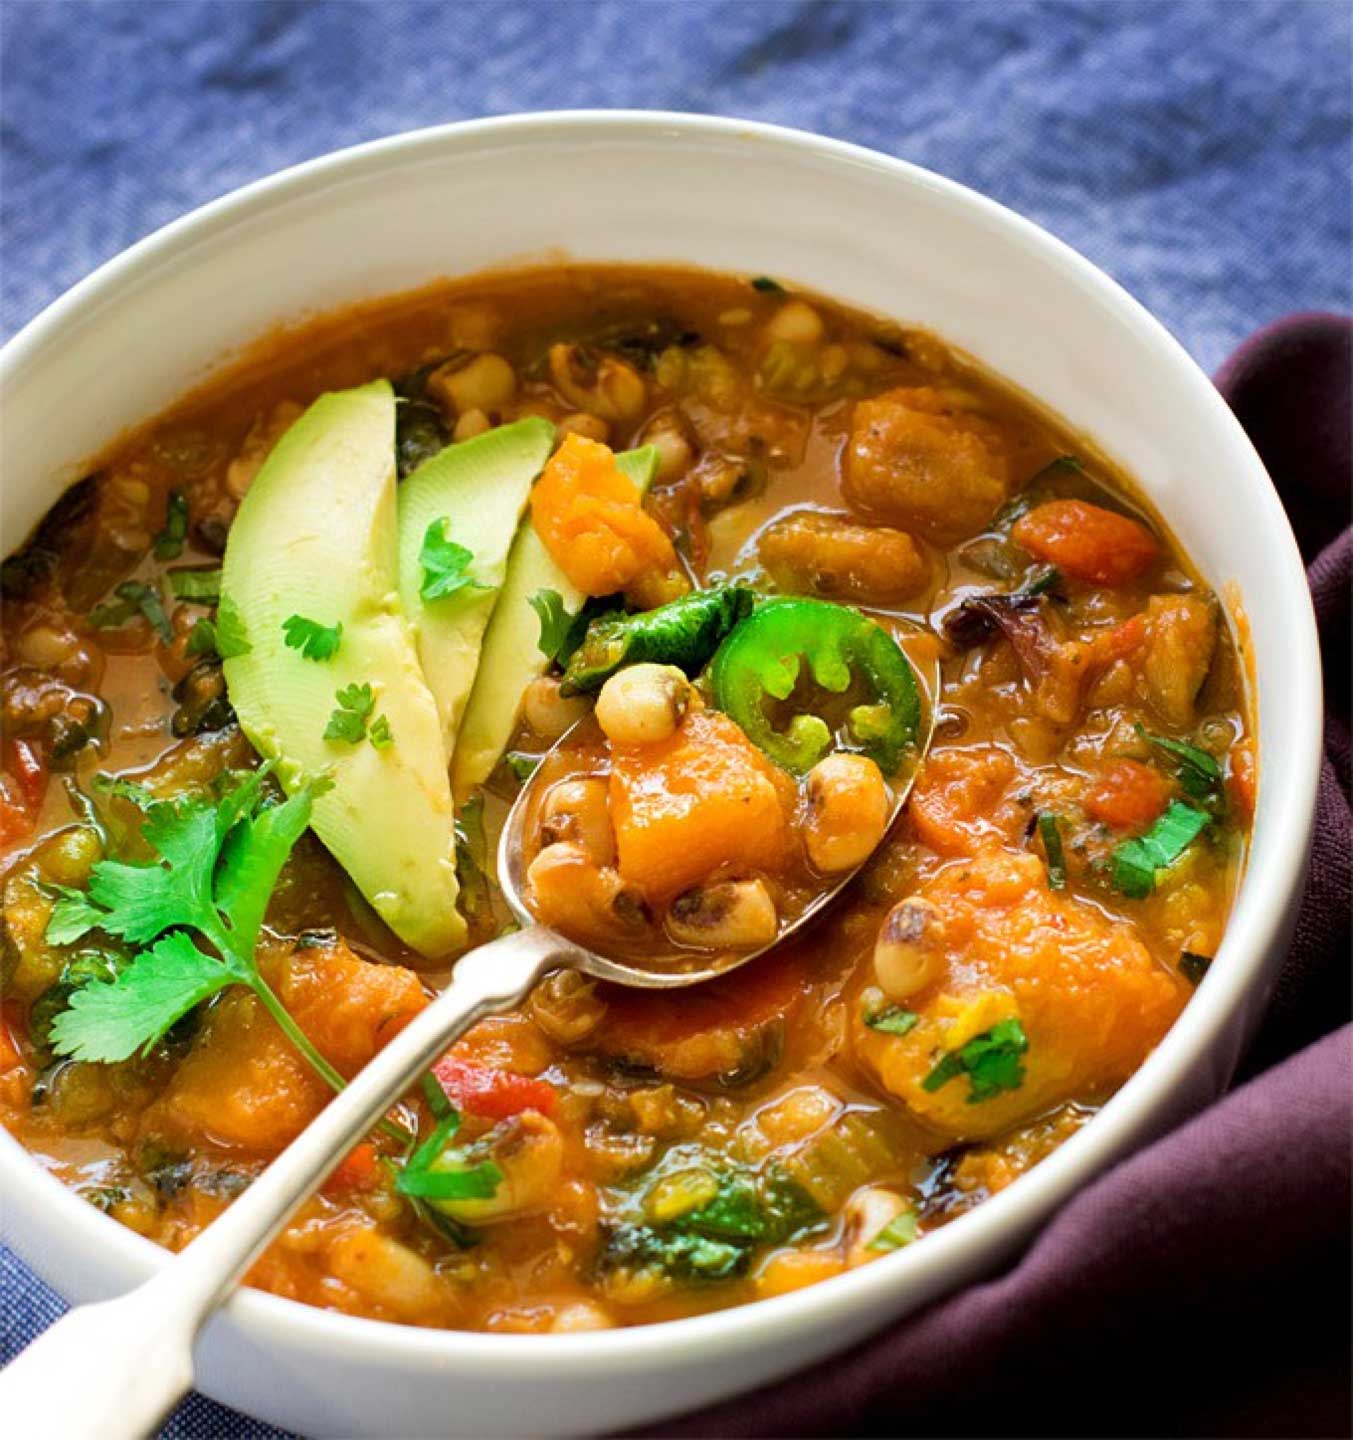 Chili doesn’t have to include meat to be delicious! Case in point: this Instant Pot Black Eyed Peas Lentils Butternut Squash Chili from Khushbooat Carve Your Craving! We’ve got plenty more vegan and vegetarian chili ideas for you (plus chicken, turkey and beef chili, too)! Be sure to check out all the yummy recipes!